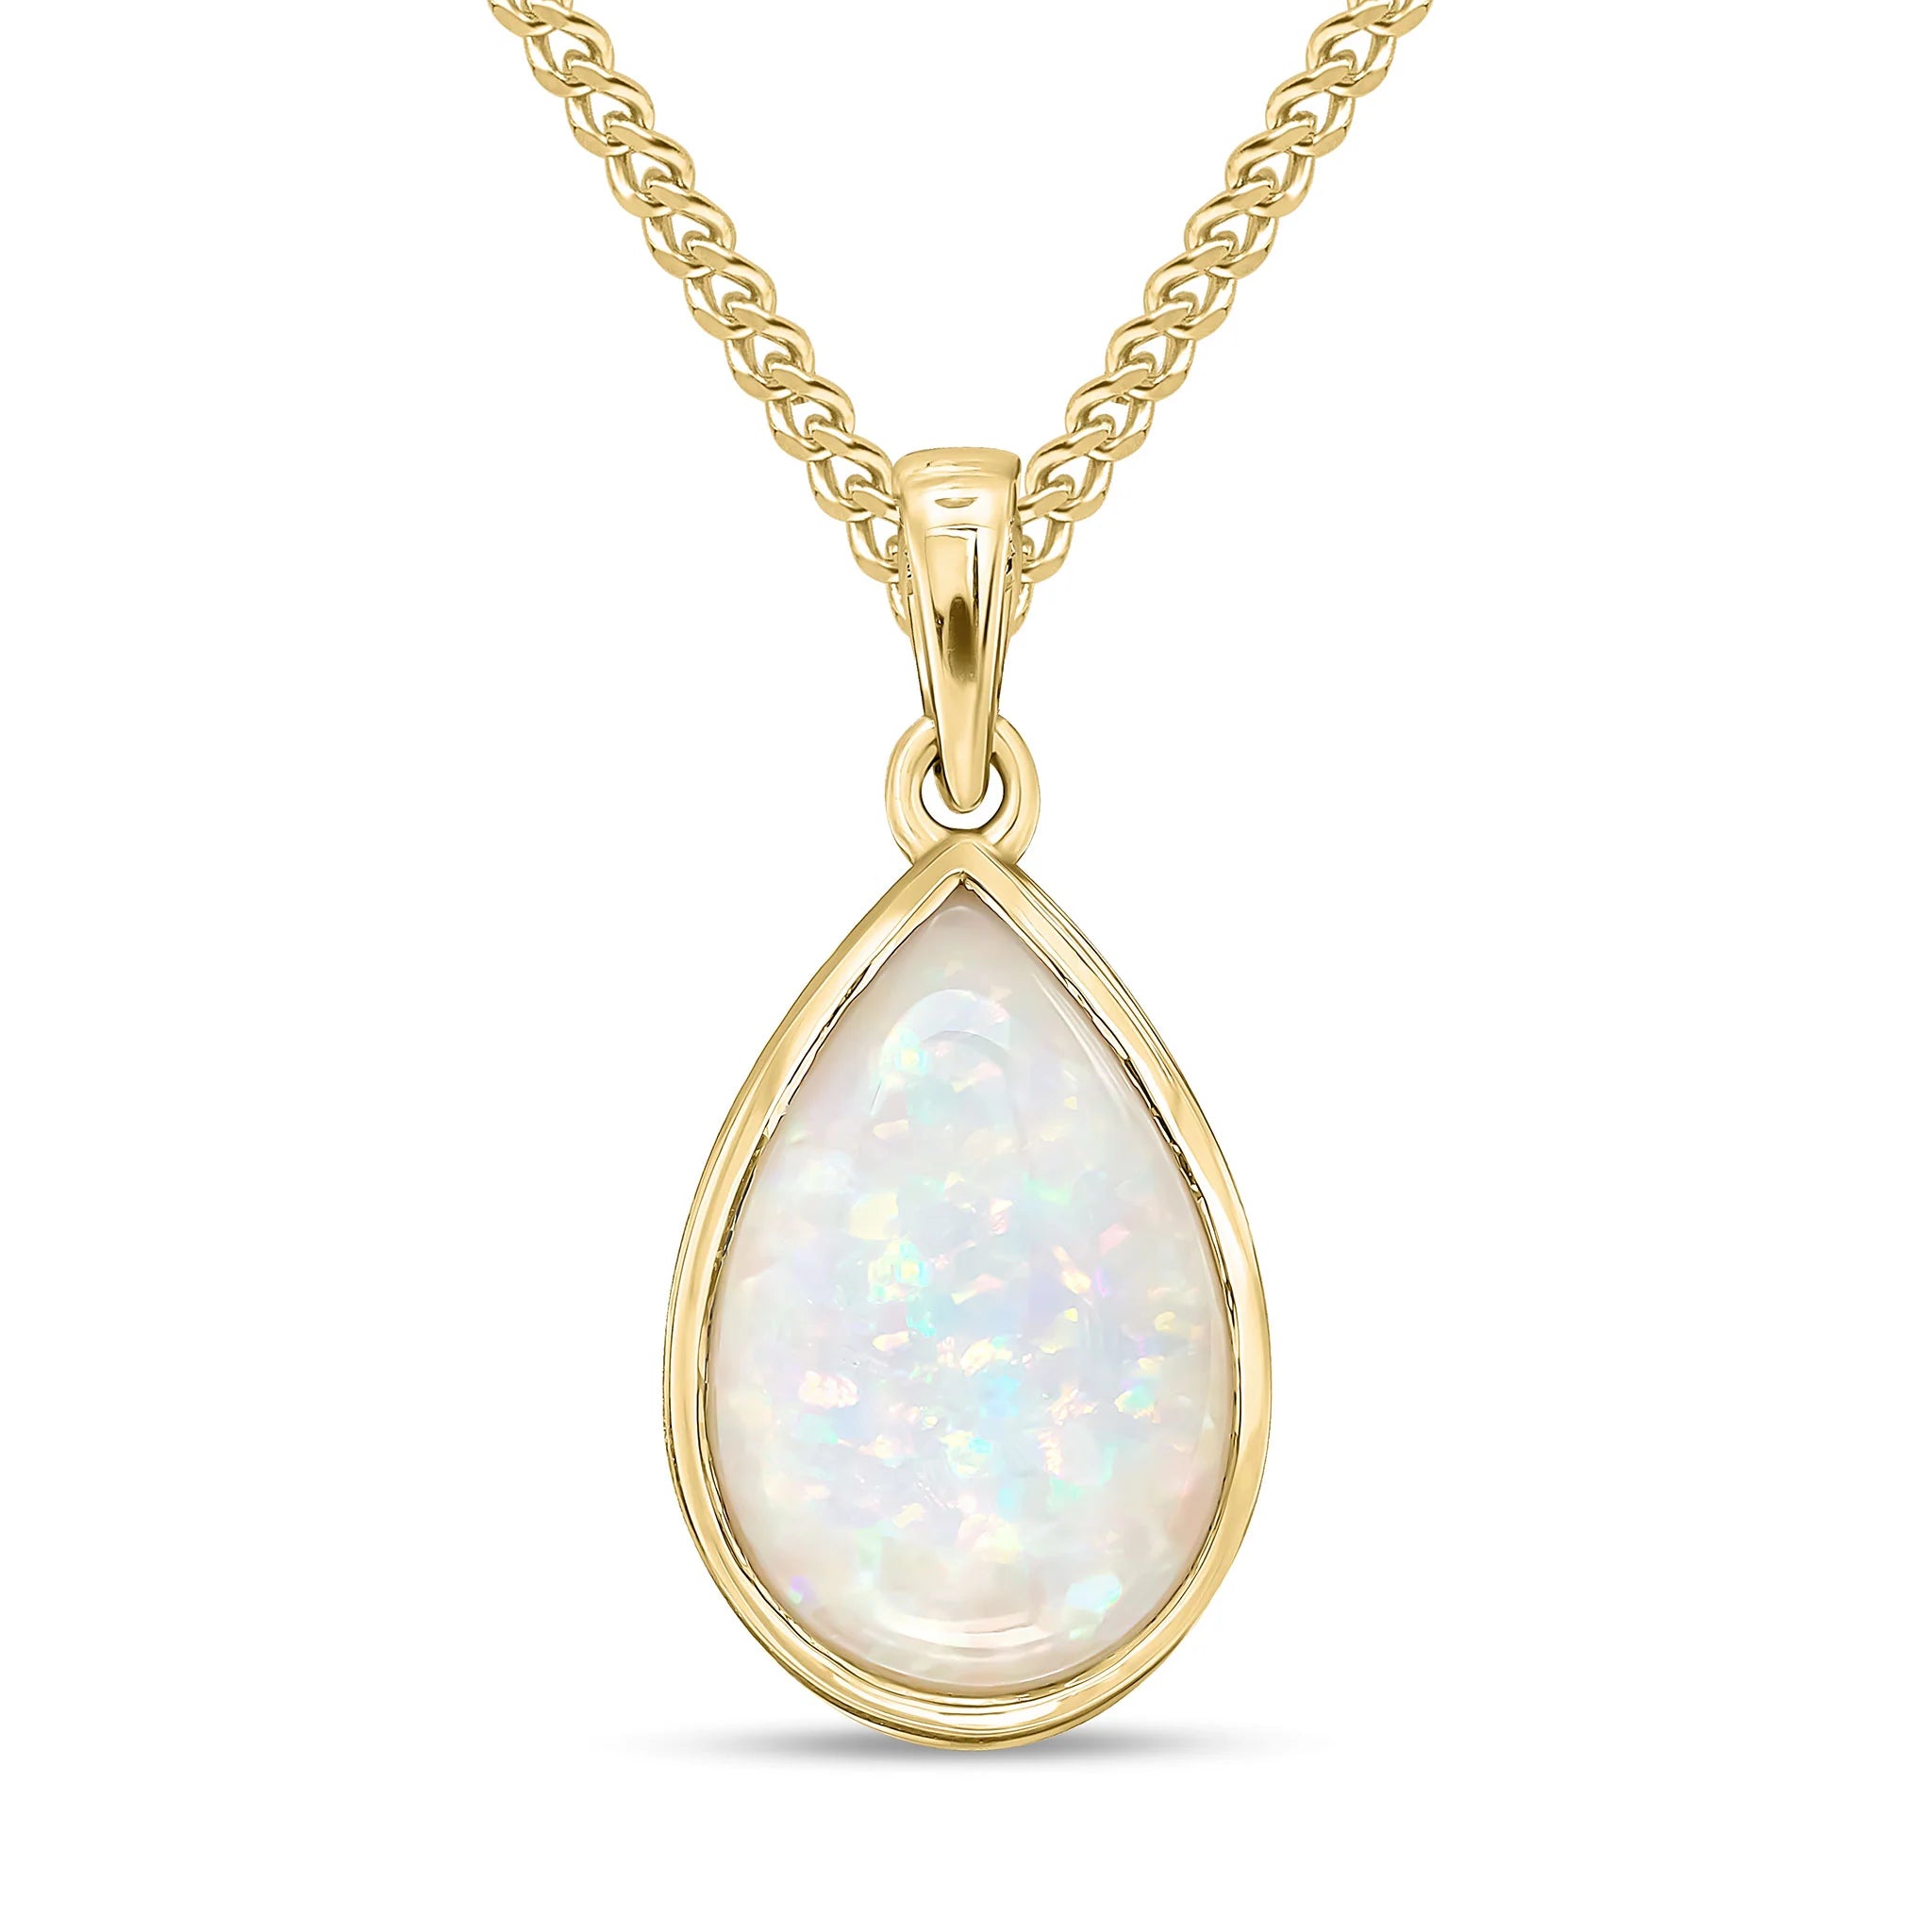 9CT Yellow Gold Pear Shaped Opal Rubover Pendant (14x9mm)